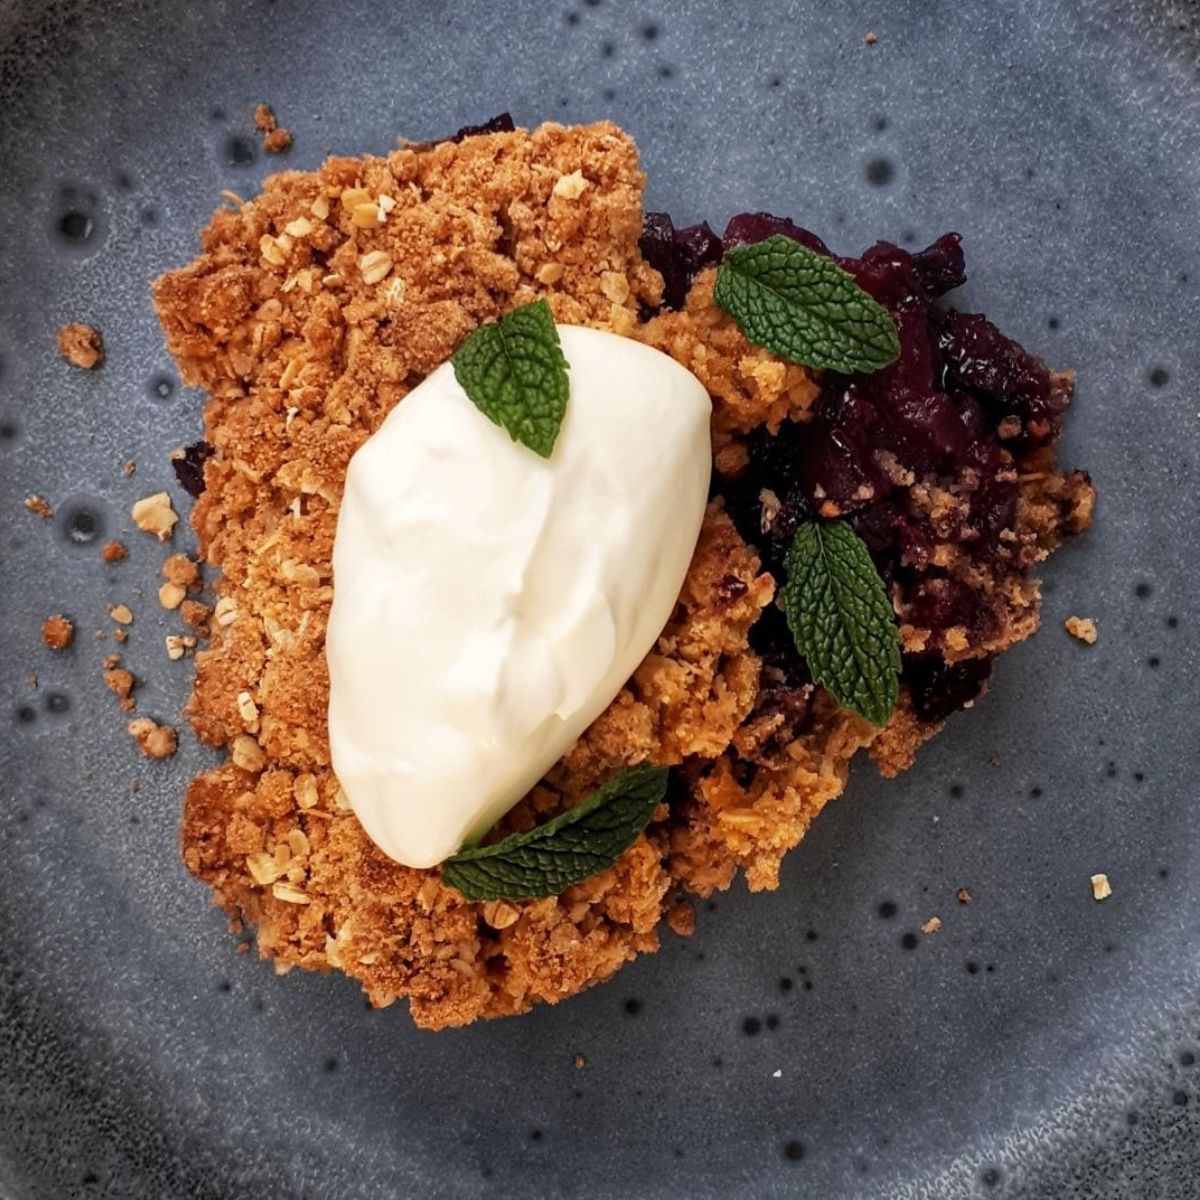 Apple and Blueberry Crumble A Classic Dessert